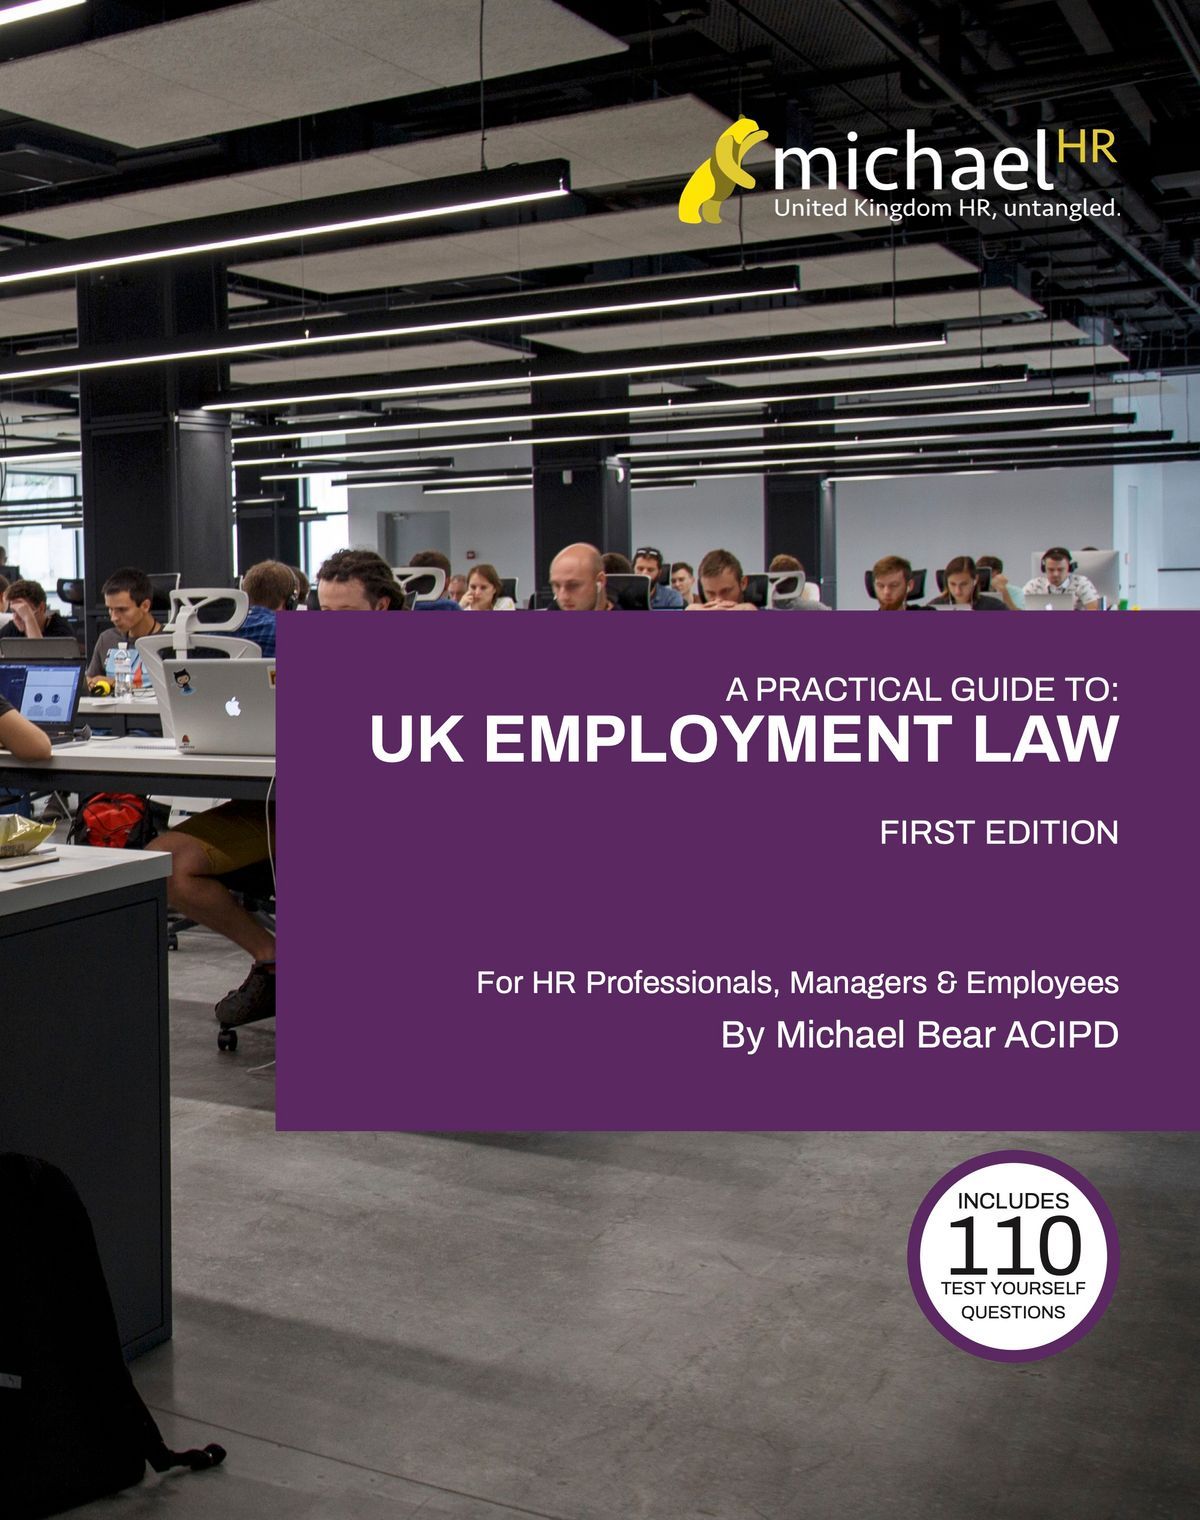 My Journey to Writing "A Practical Guide To: UK Employment Law"